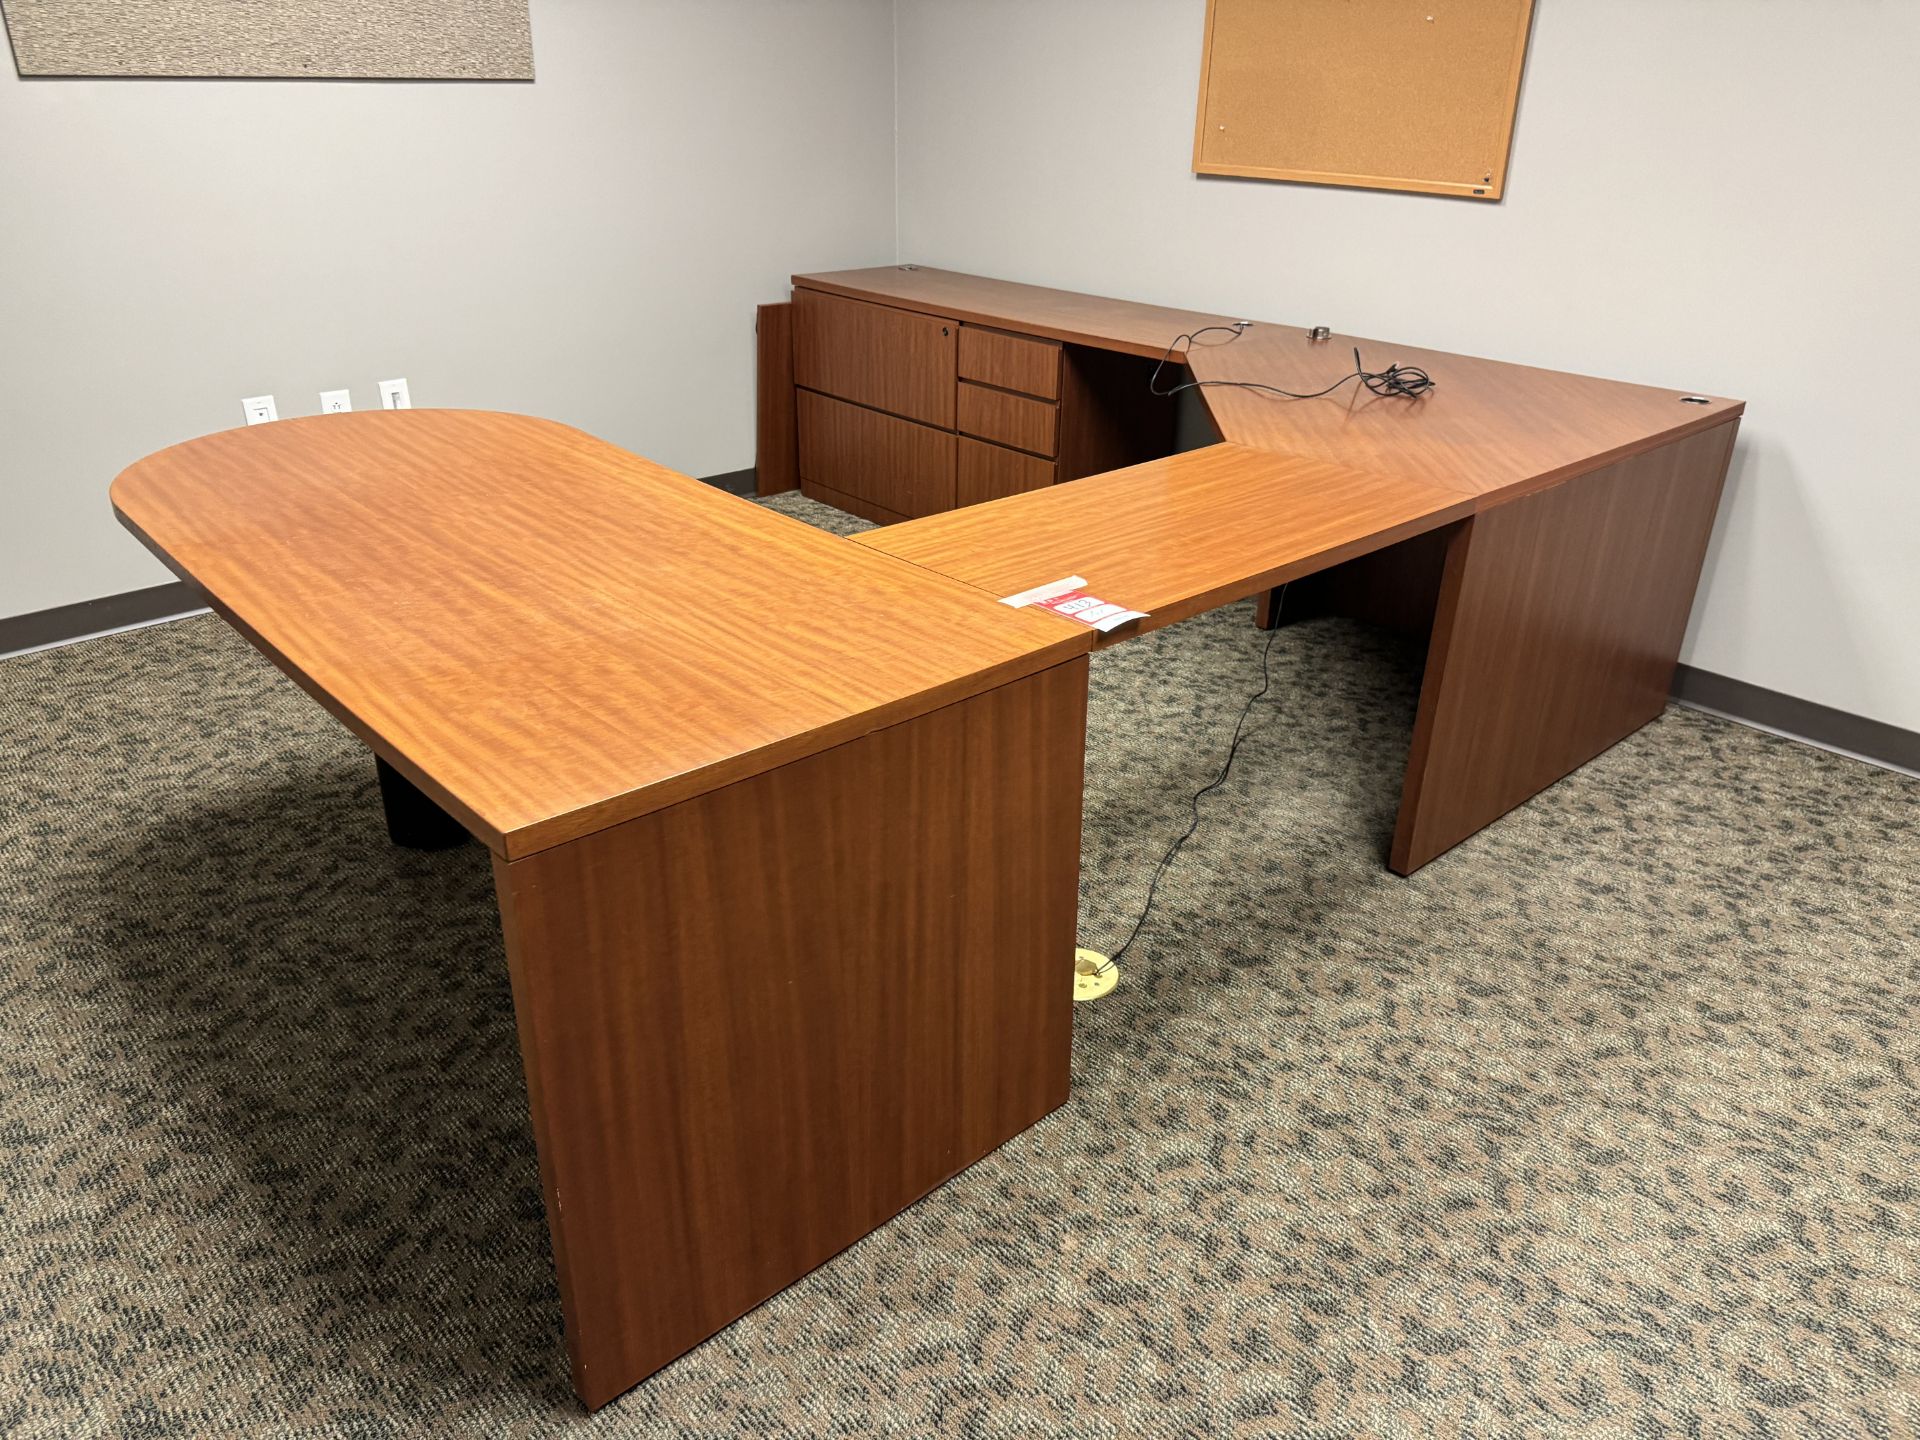 CONTENTS OF OFFICE INCLUDING LARGE U-SHAPED DESK SYSTEM THAT IS APPROX. 9' X 9'L CRESCENZA IS 54'' X